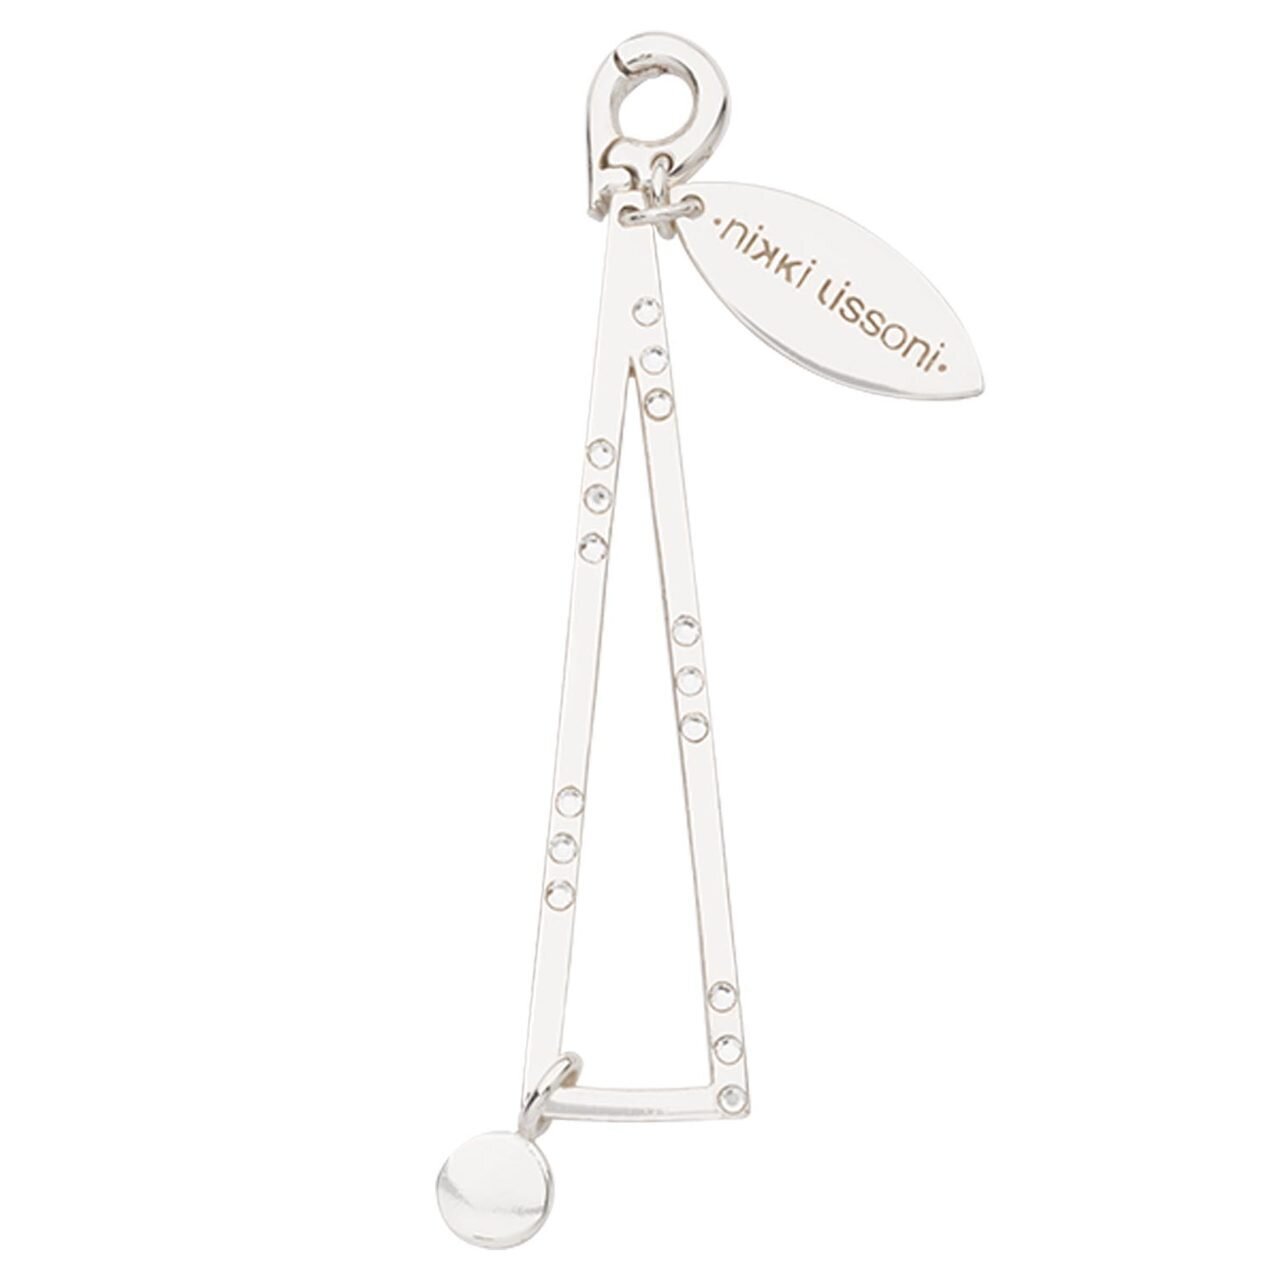 Nikki Lissoni Chic Long Triangle Charm with Swarovski Crystals Silver-plated 58mm D1254SL